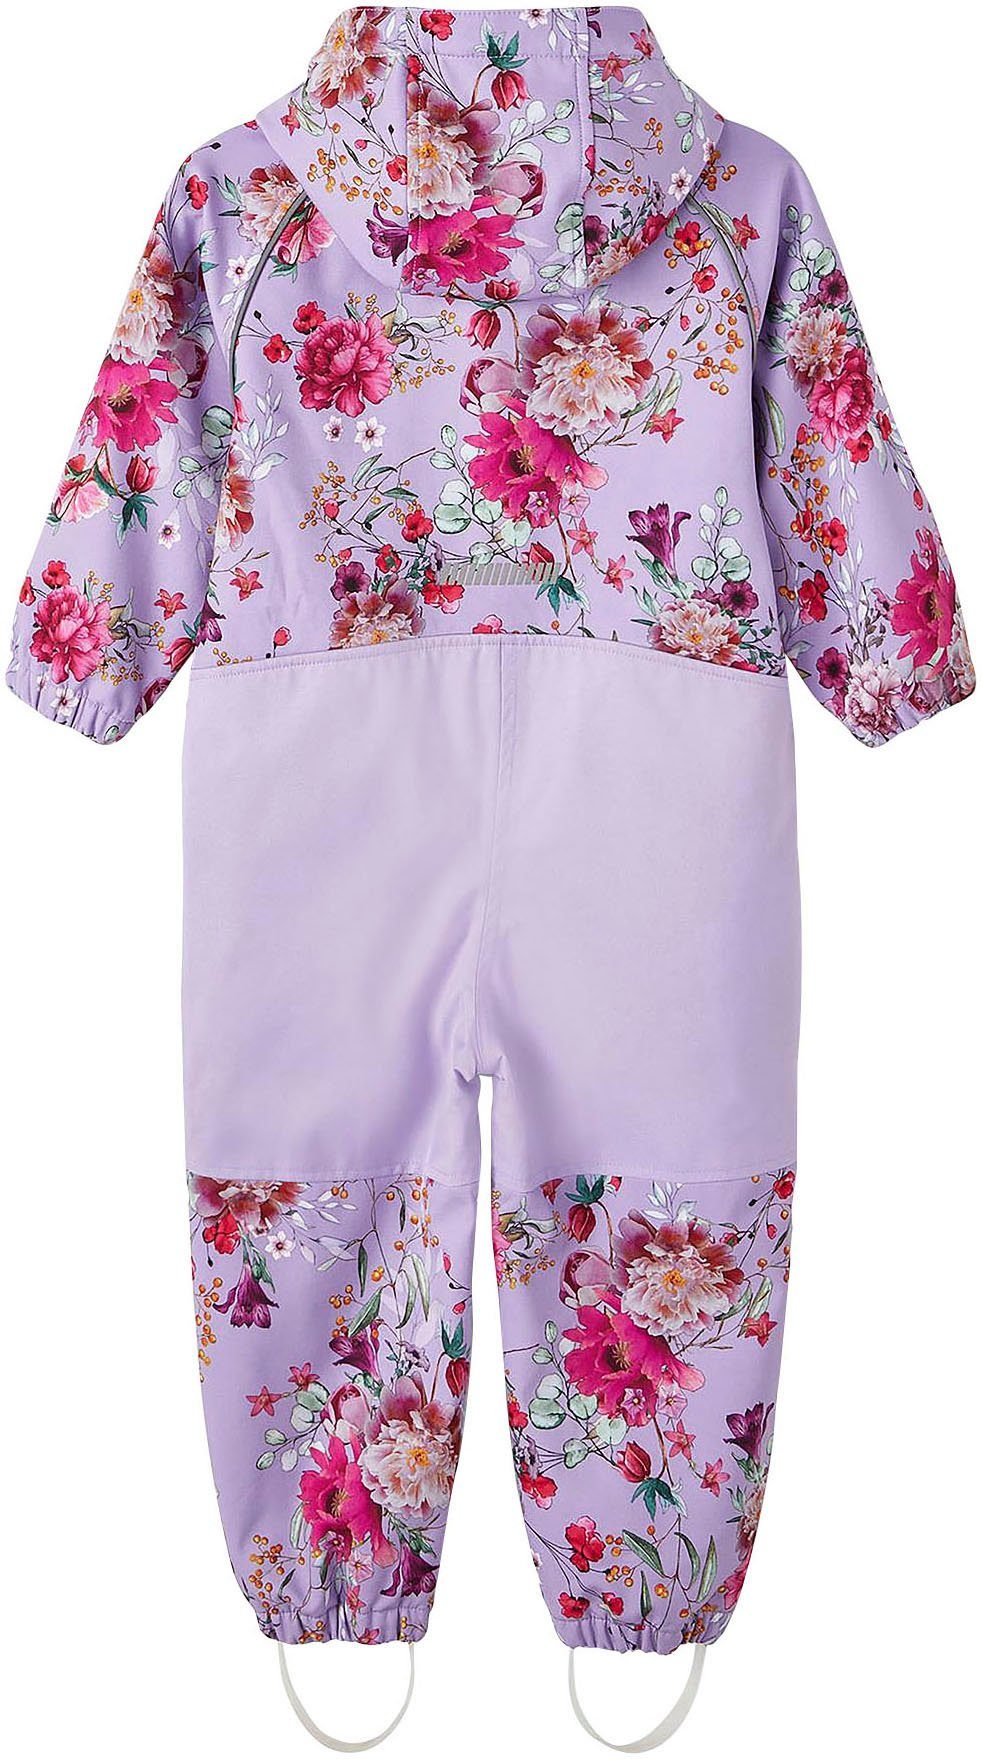 NMFALFA 2FO Softshelloverall Name NOOS FLORAL Sand SUIT Verbena It